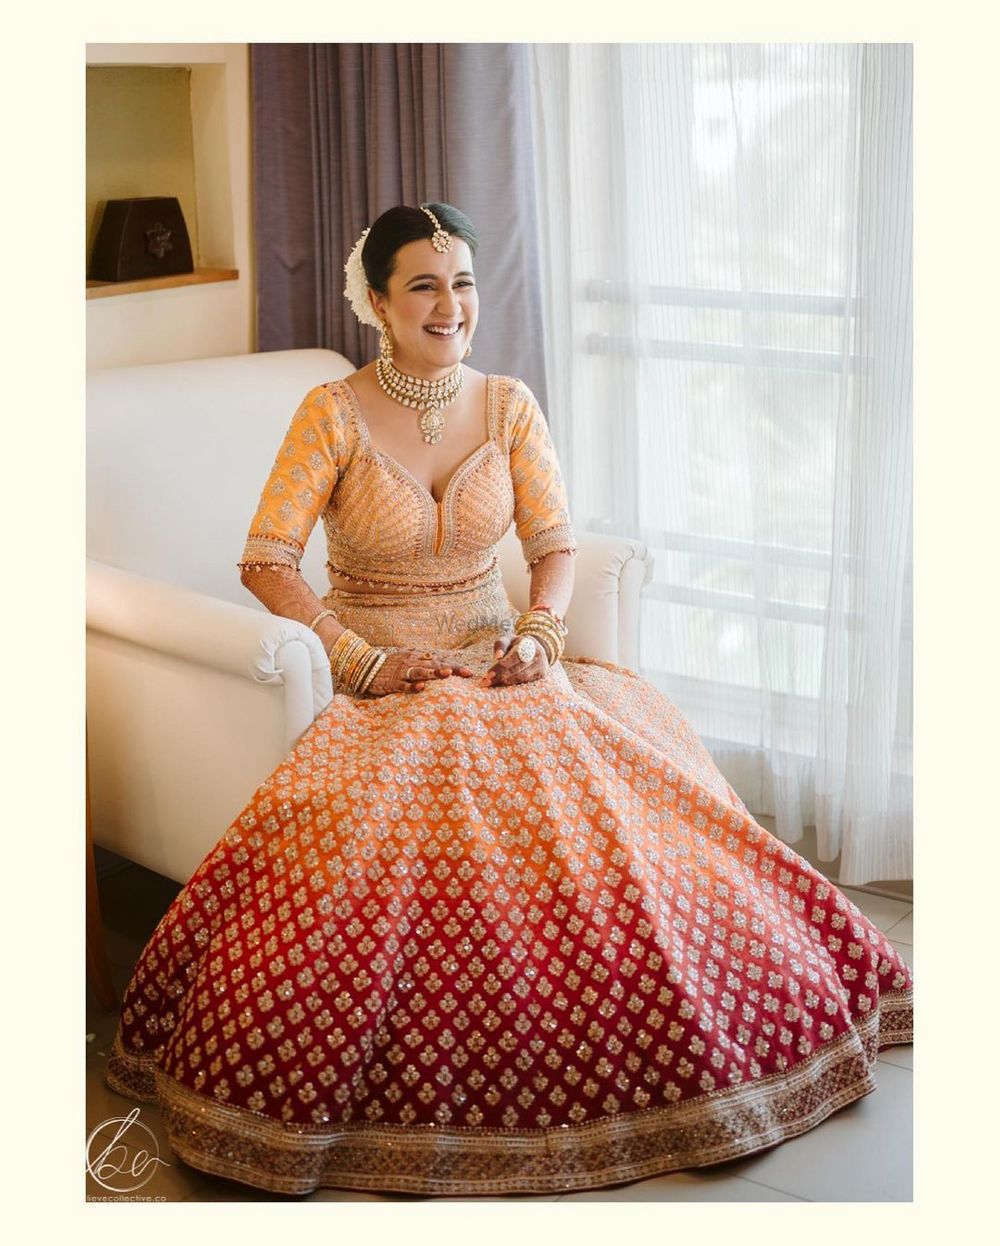 Photo By Frontier Raas - Bridal Wear